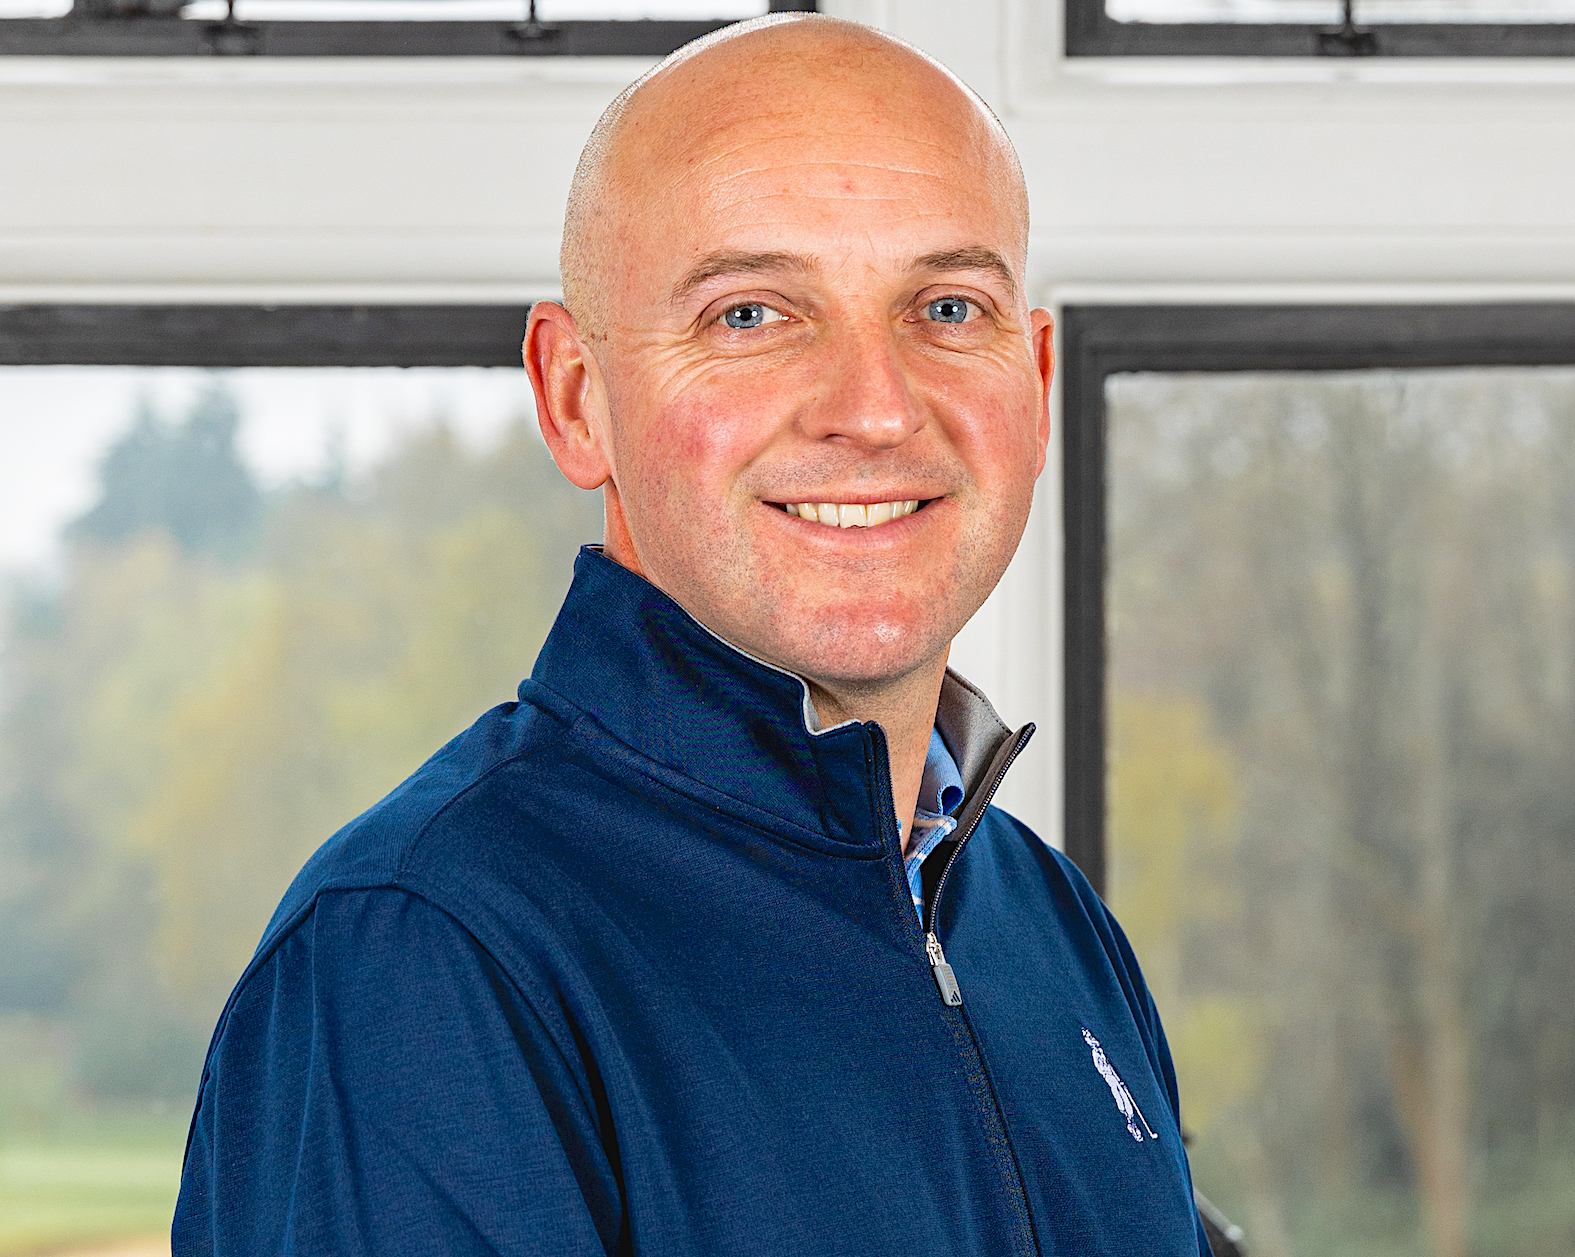 Foxhills' Golf Course and Estate Manager Derrick Johnstone